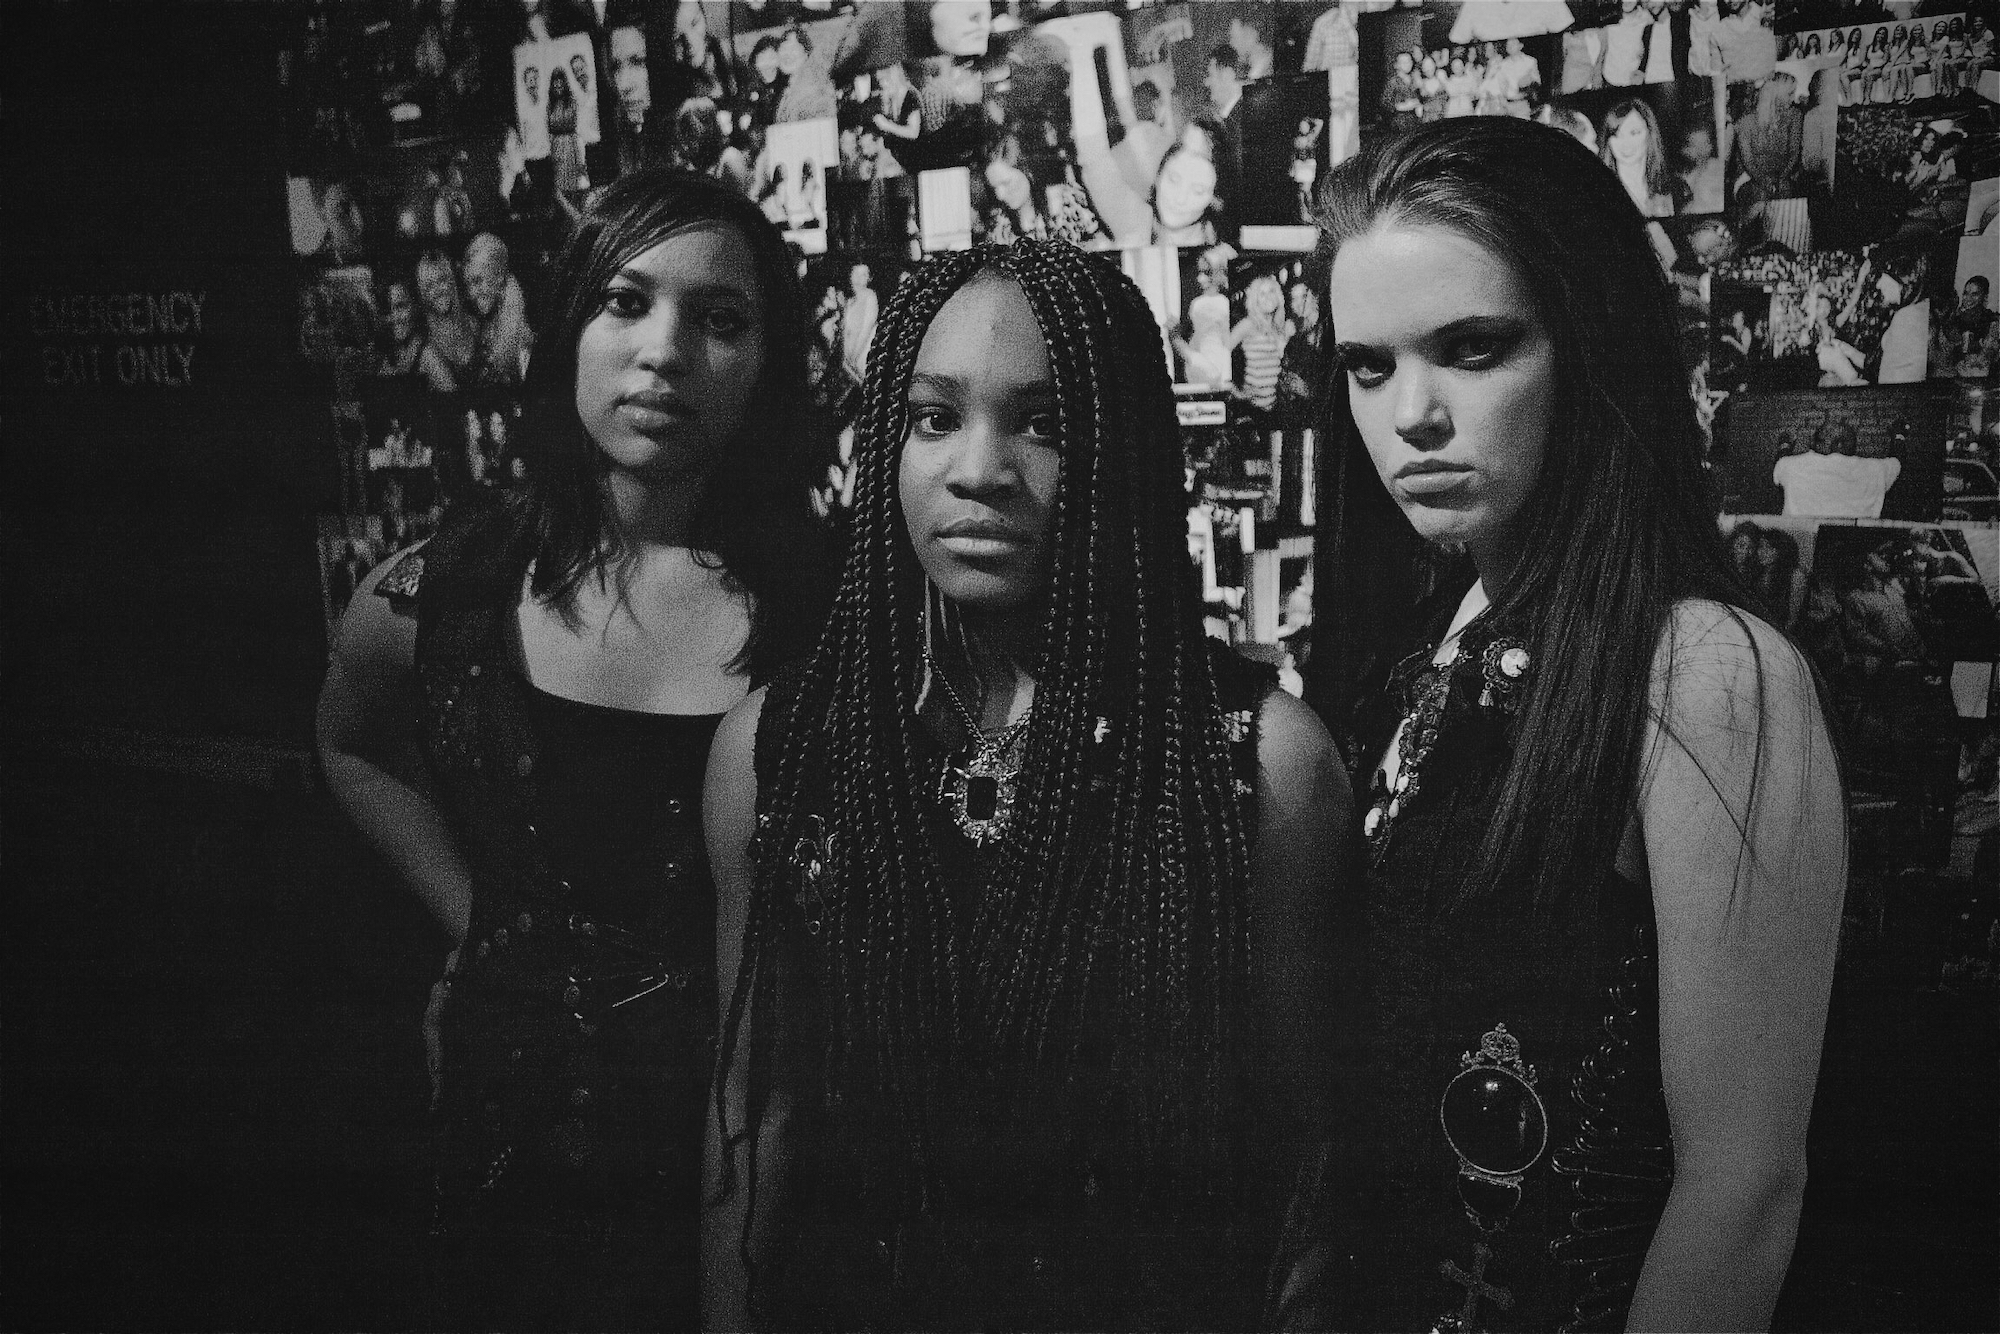 Girls stand backstage in rockstar outfits with a postered wall in black and white color.